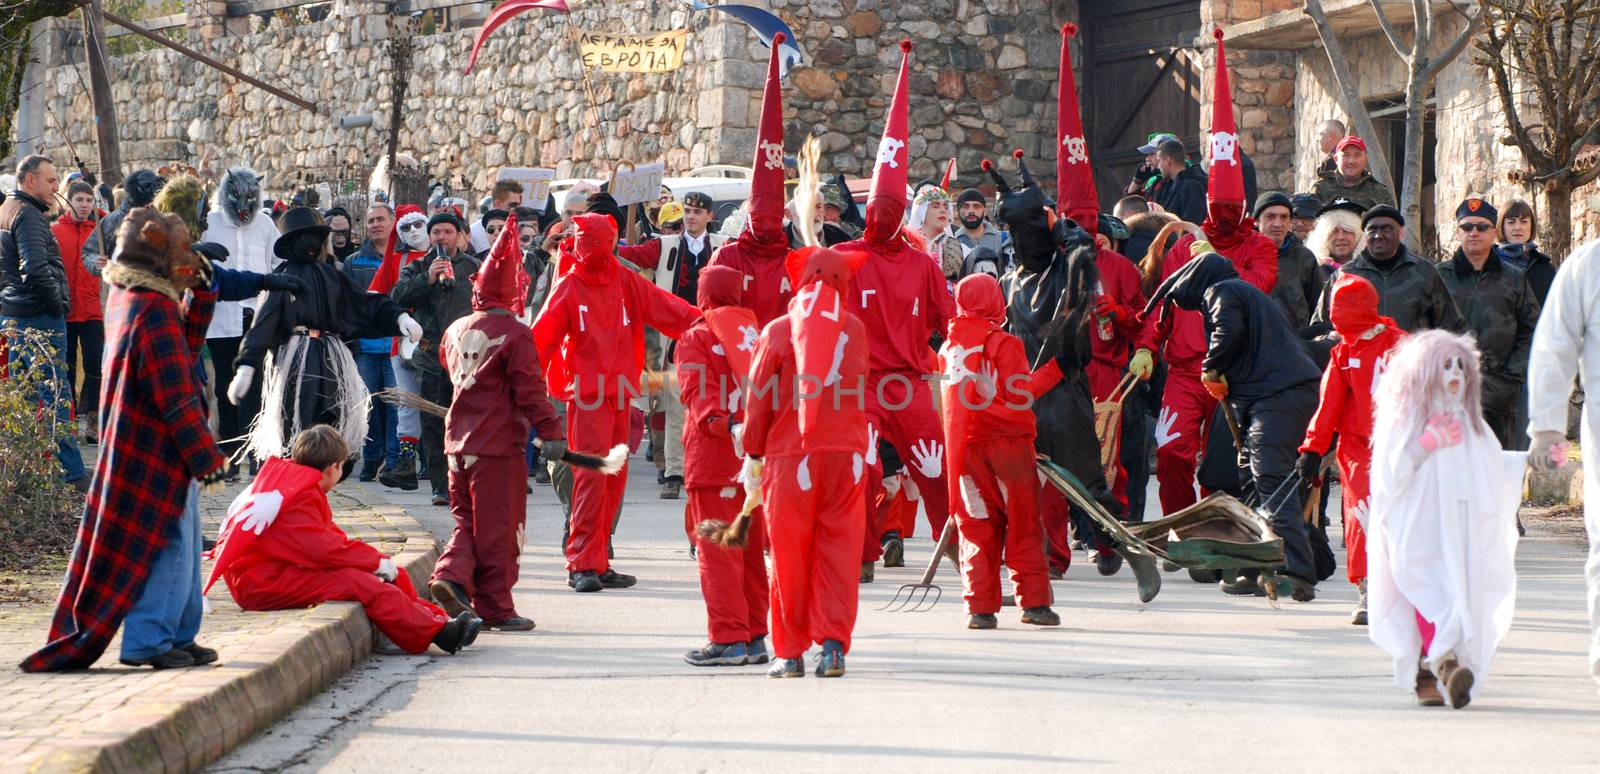 VEVCANI, MACEDONIA - 13 JANUARY , 2020: General atmosphere with dressed up participants at an annual Vevcani Carnival, in southwestern Macedonia